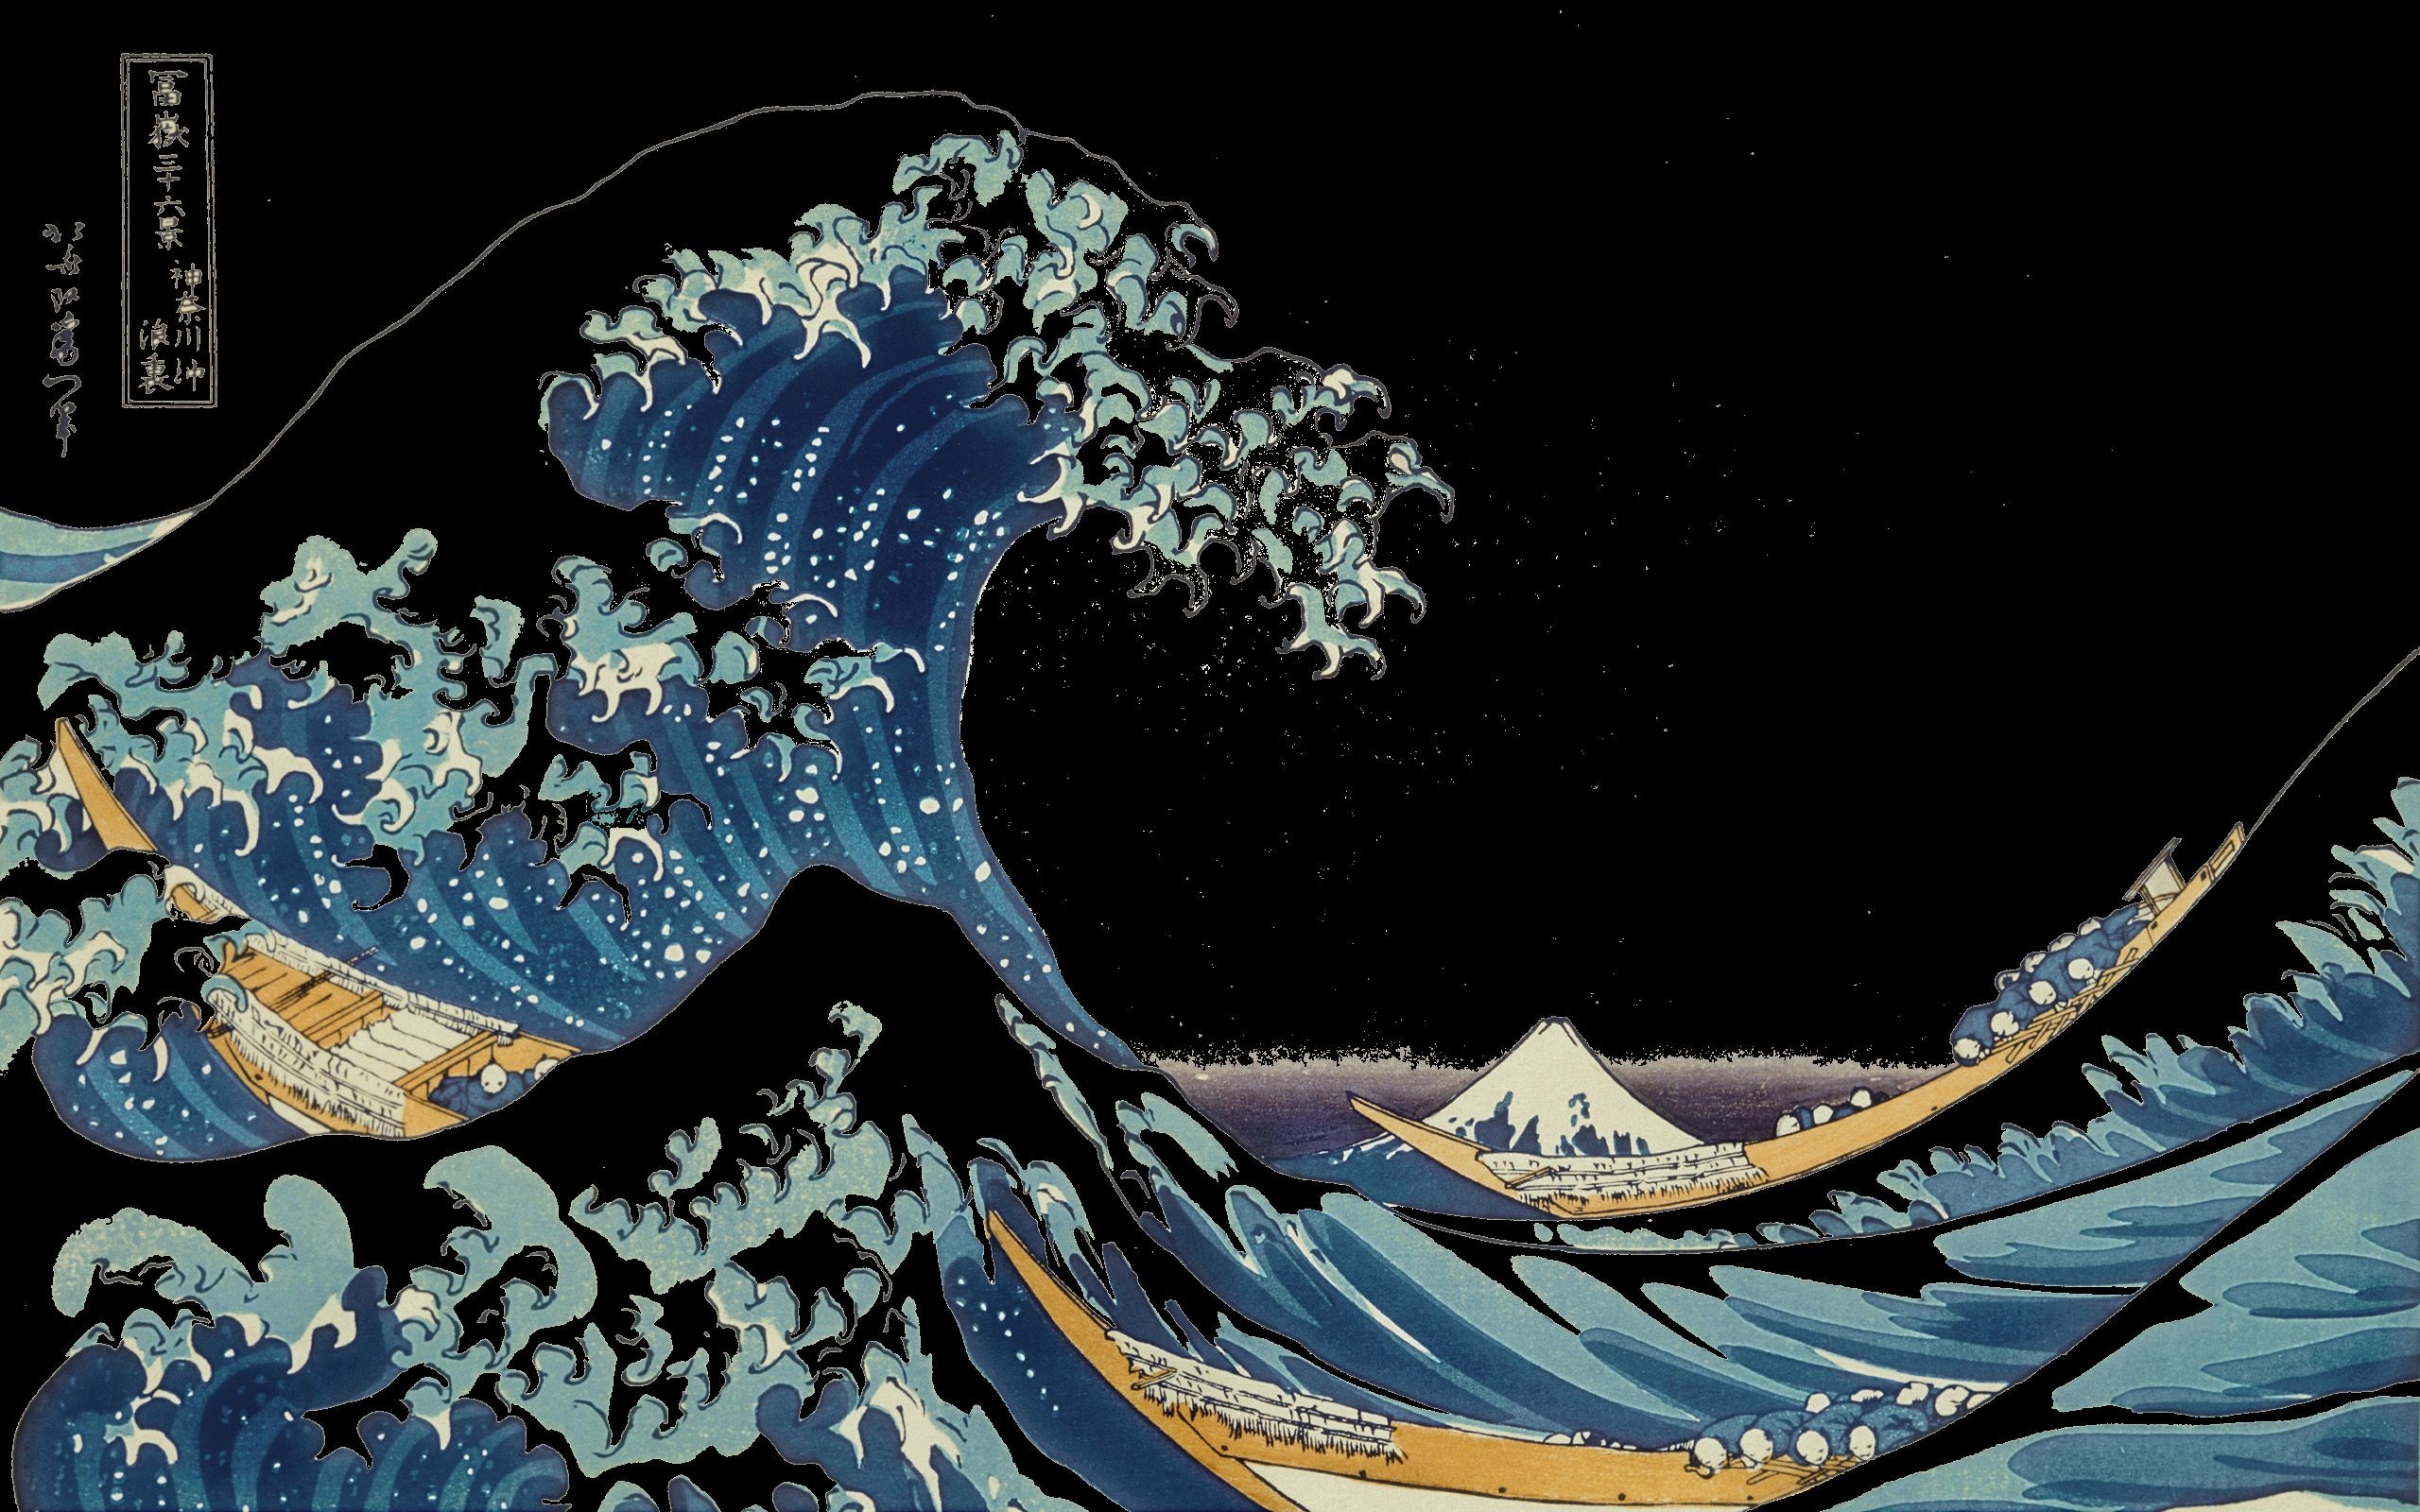 2560x1600 Download Add to favorites. More. Report. Palette: Tags: artwork inverted  The Great Wave off Kanagawa